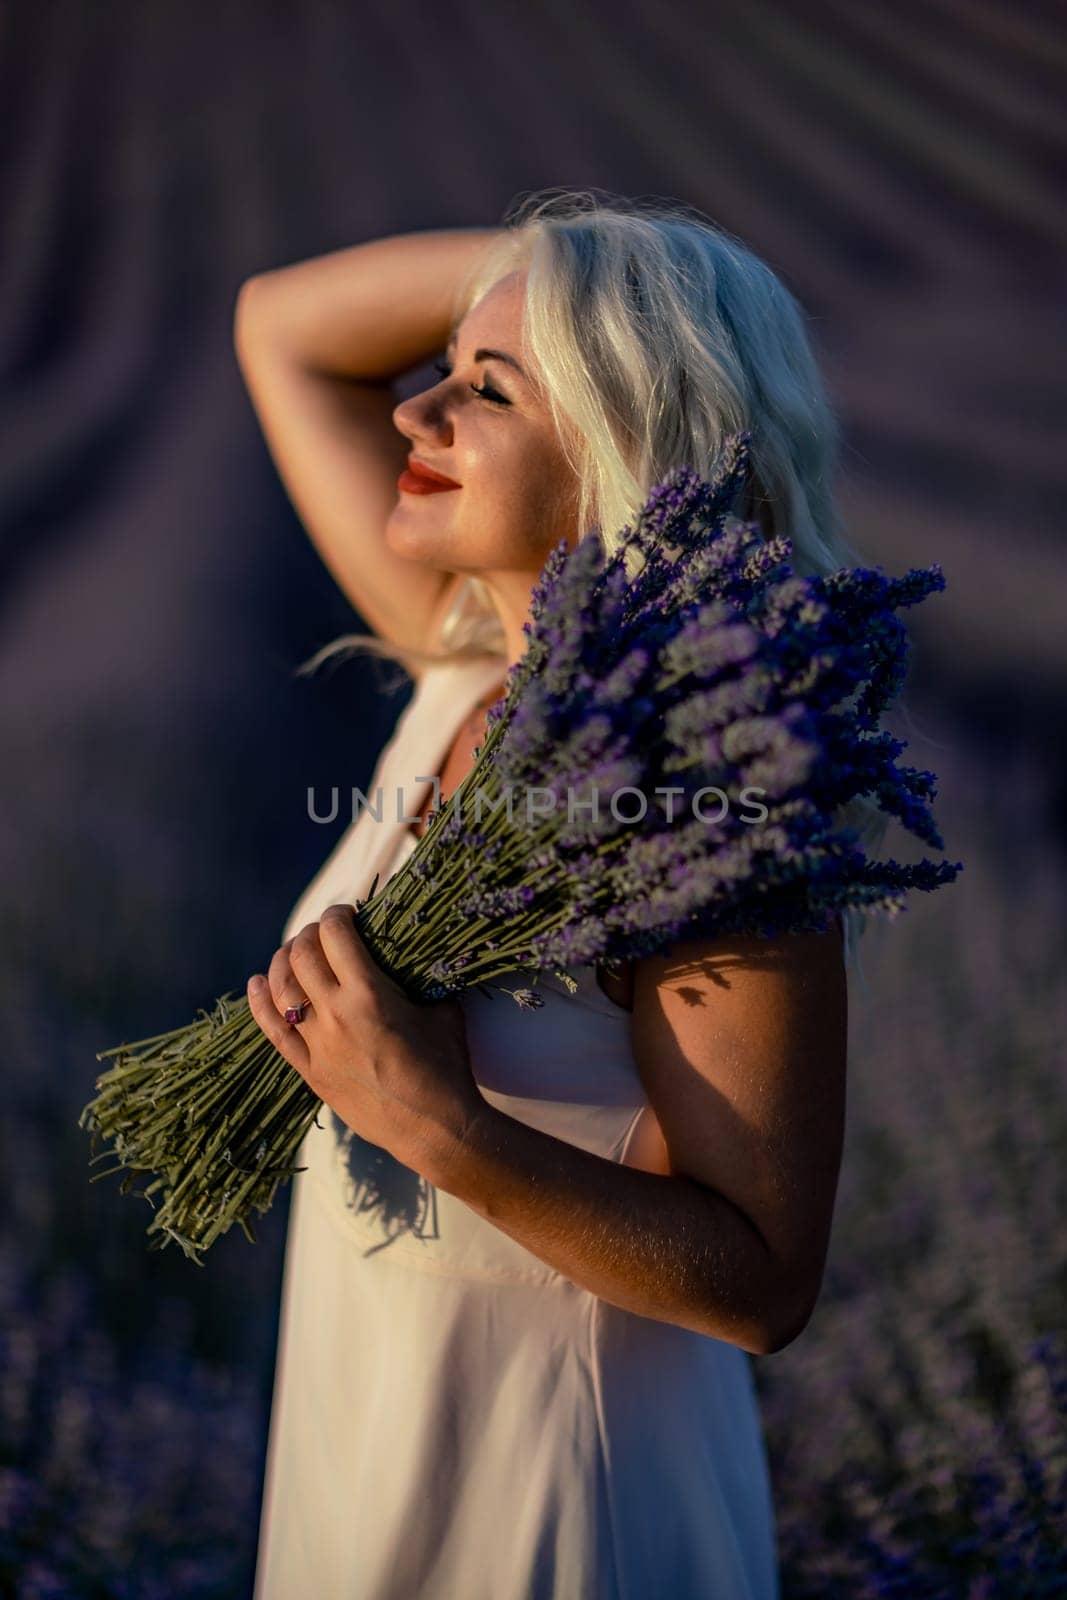 Blonde woman poses in lavender field at sunset. Happy woman in white dress holds lavender bouquet. Aromatherapy concept, lavender oil, photo session in lavender.